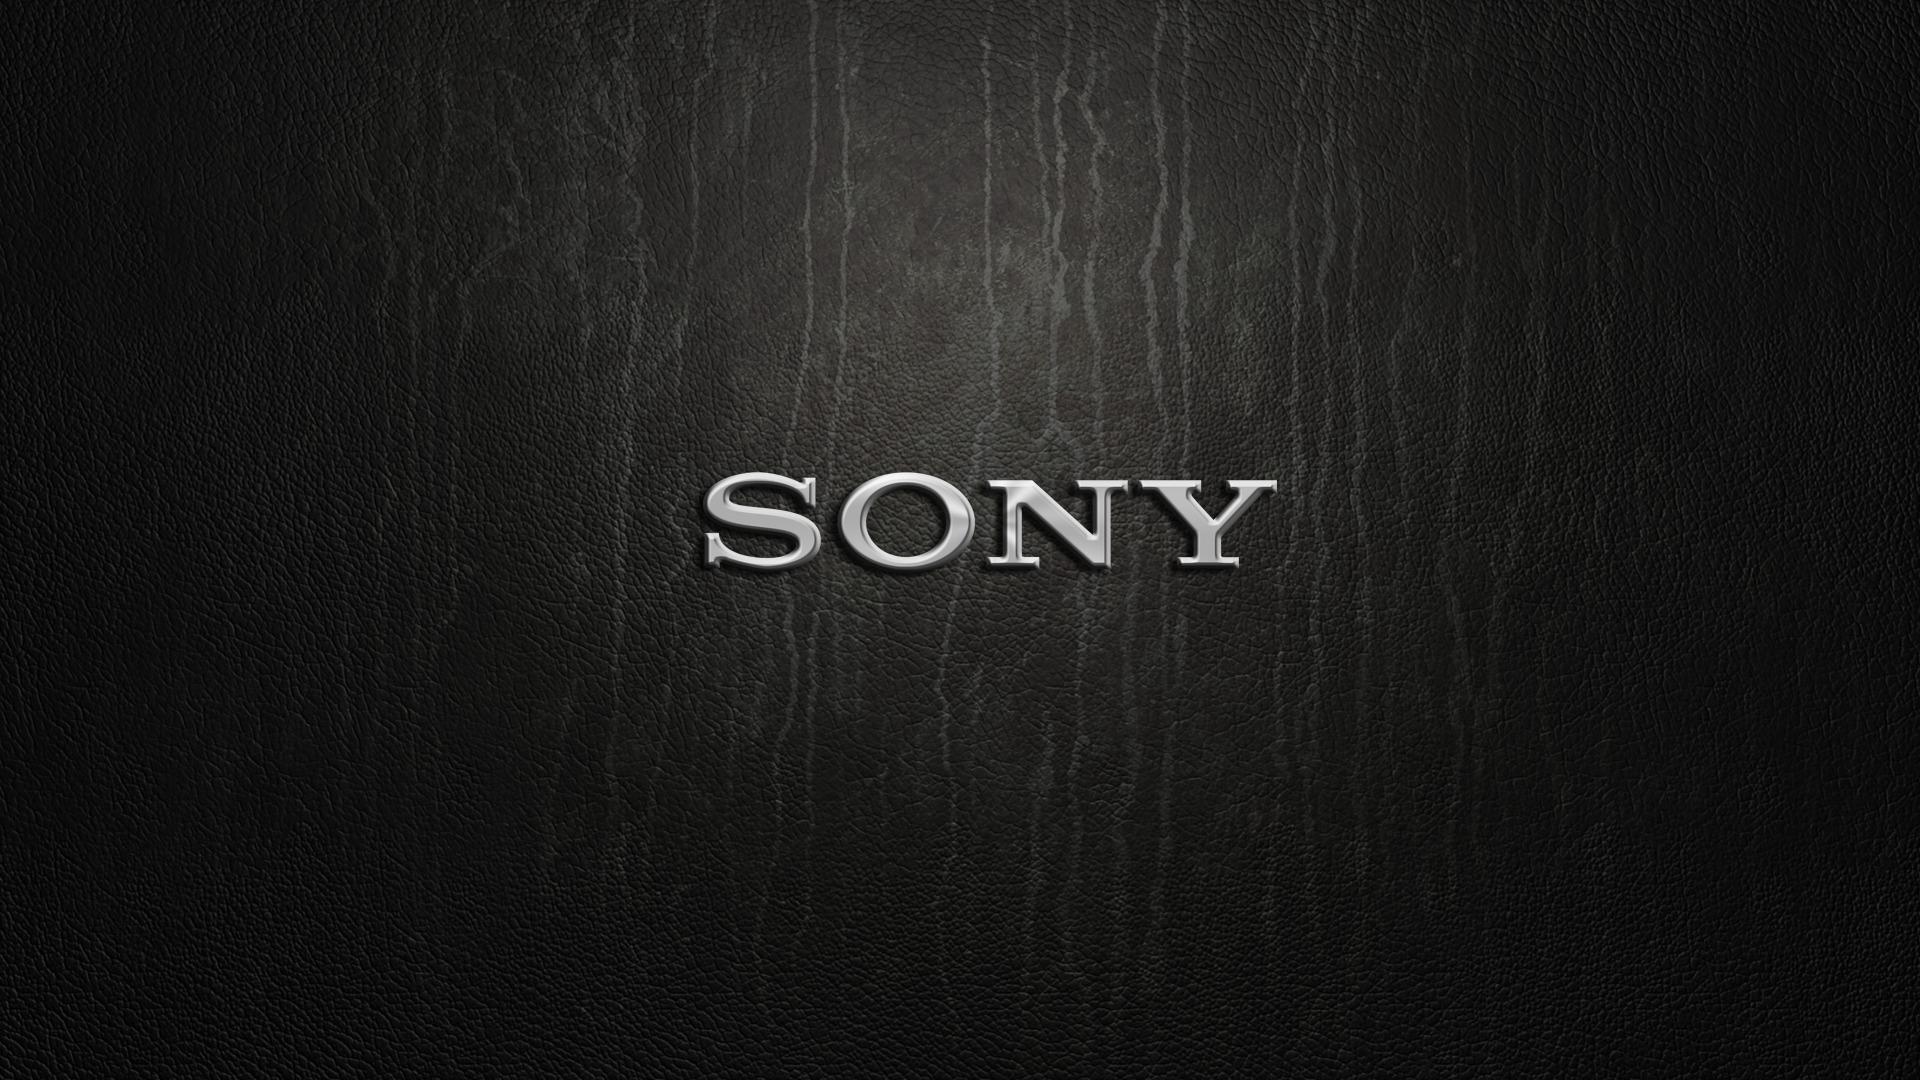 Sony 4k Wallpapers For Your Desktop Or Mobile Screen Free And Easy To Download